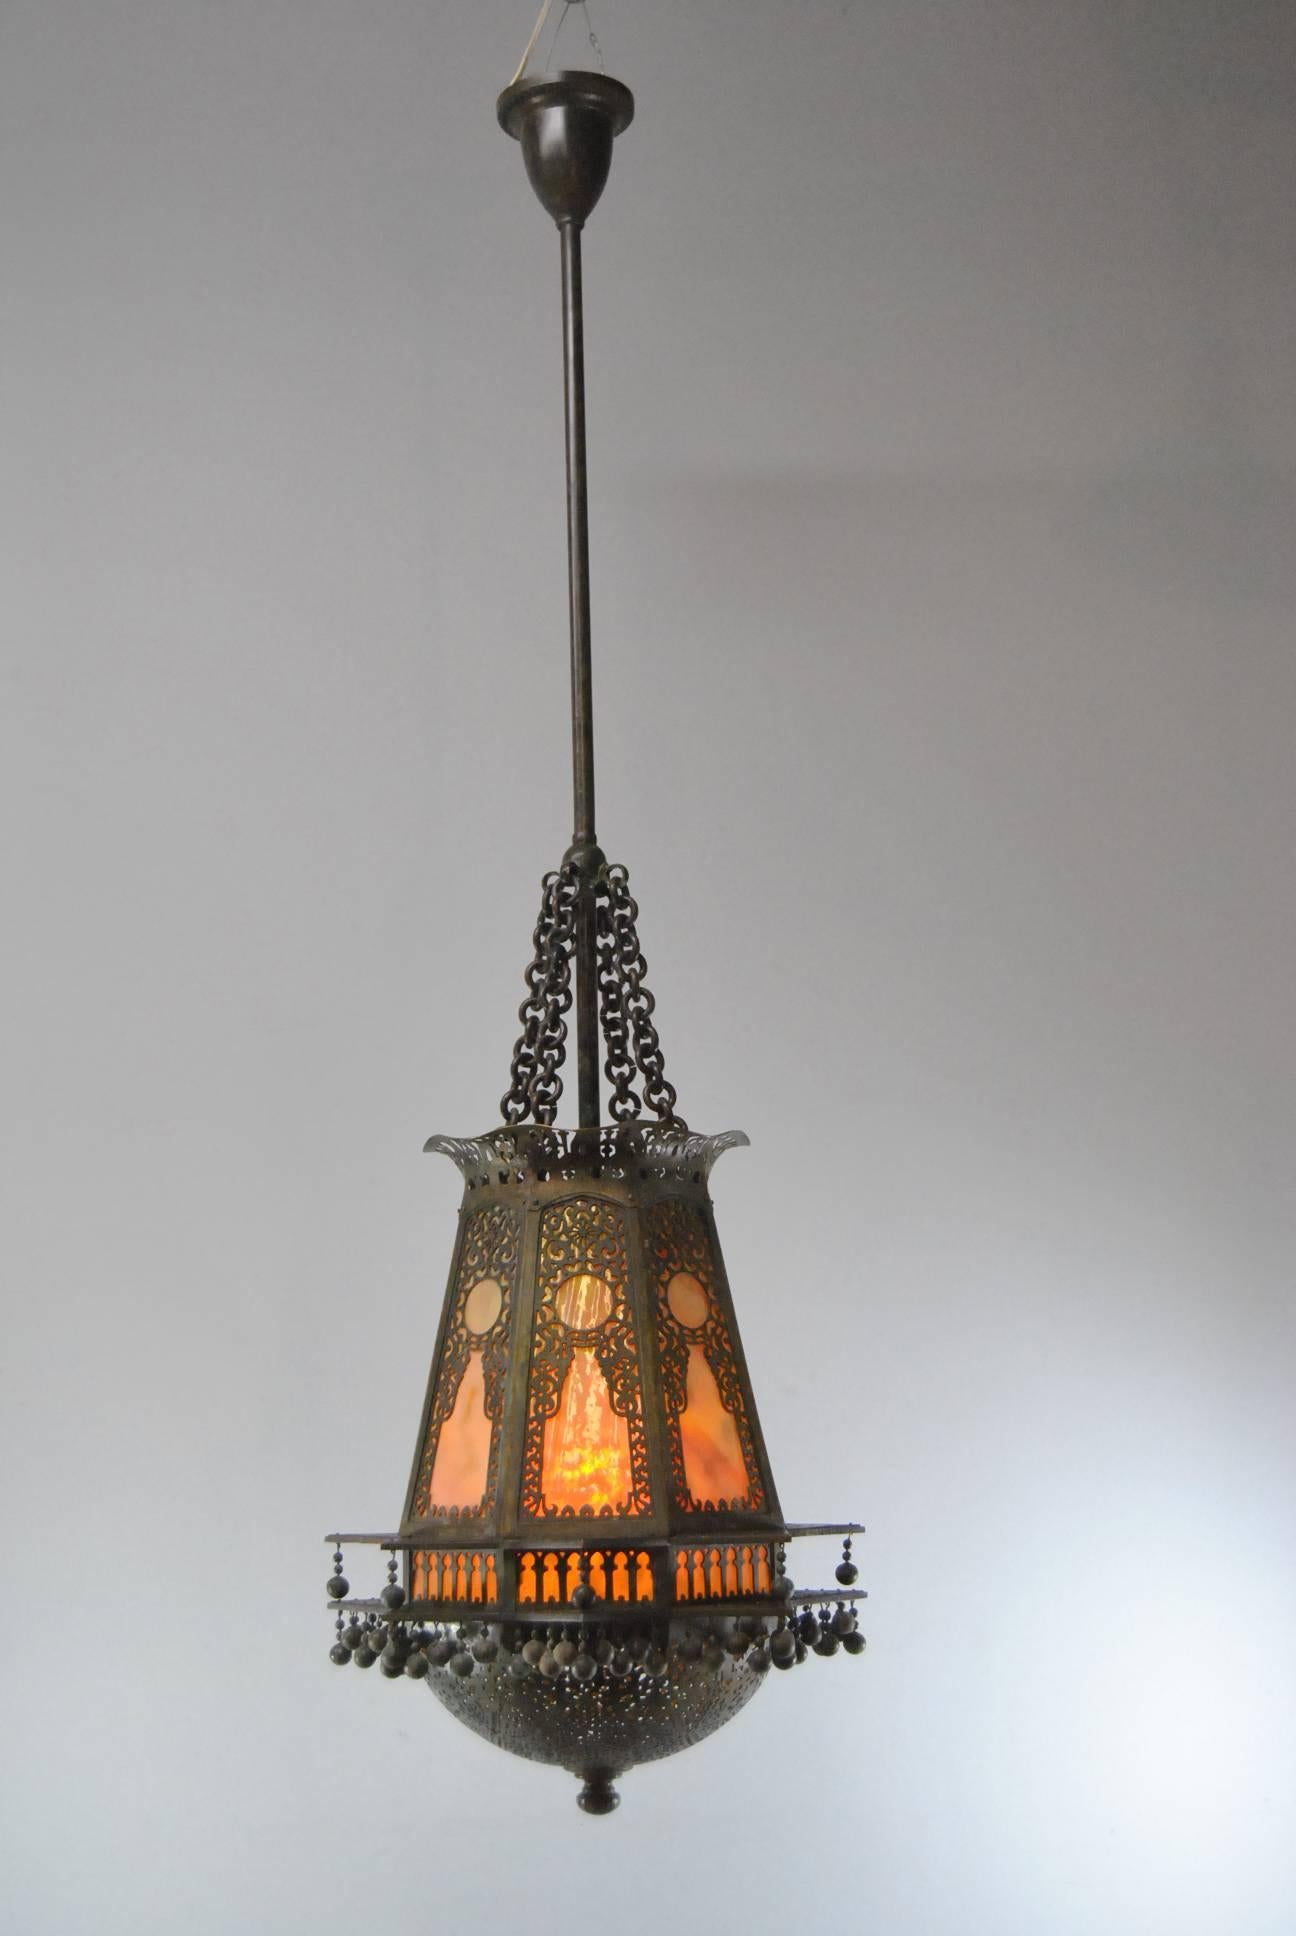 A beautiful Moorish style lantern chandelier by Tiffany Studio. This is eight sided with bronze pierced overlay and stained glass panels. The domed bottom has great open work detailing and opens to a one socket light. Four chains attach to the top